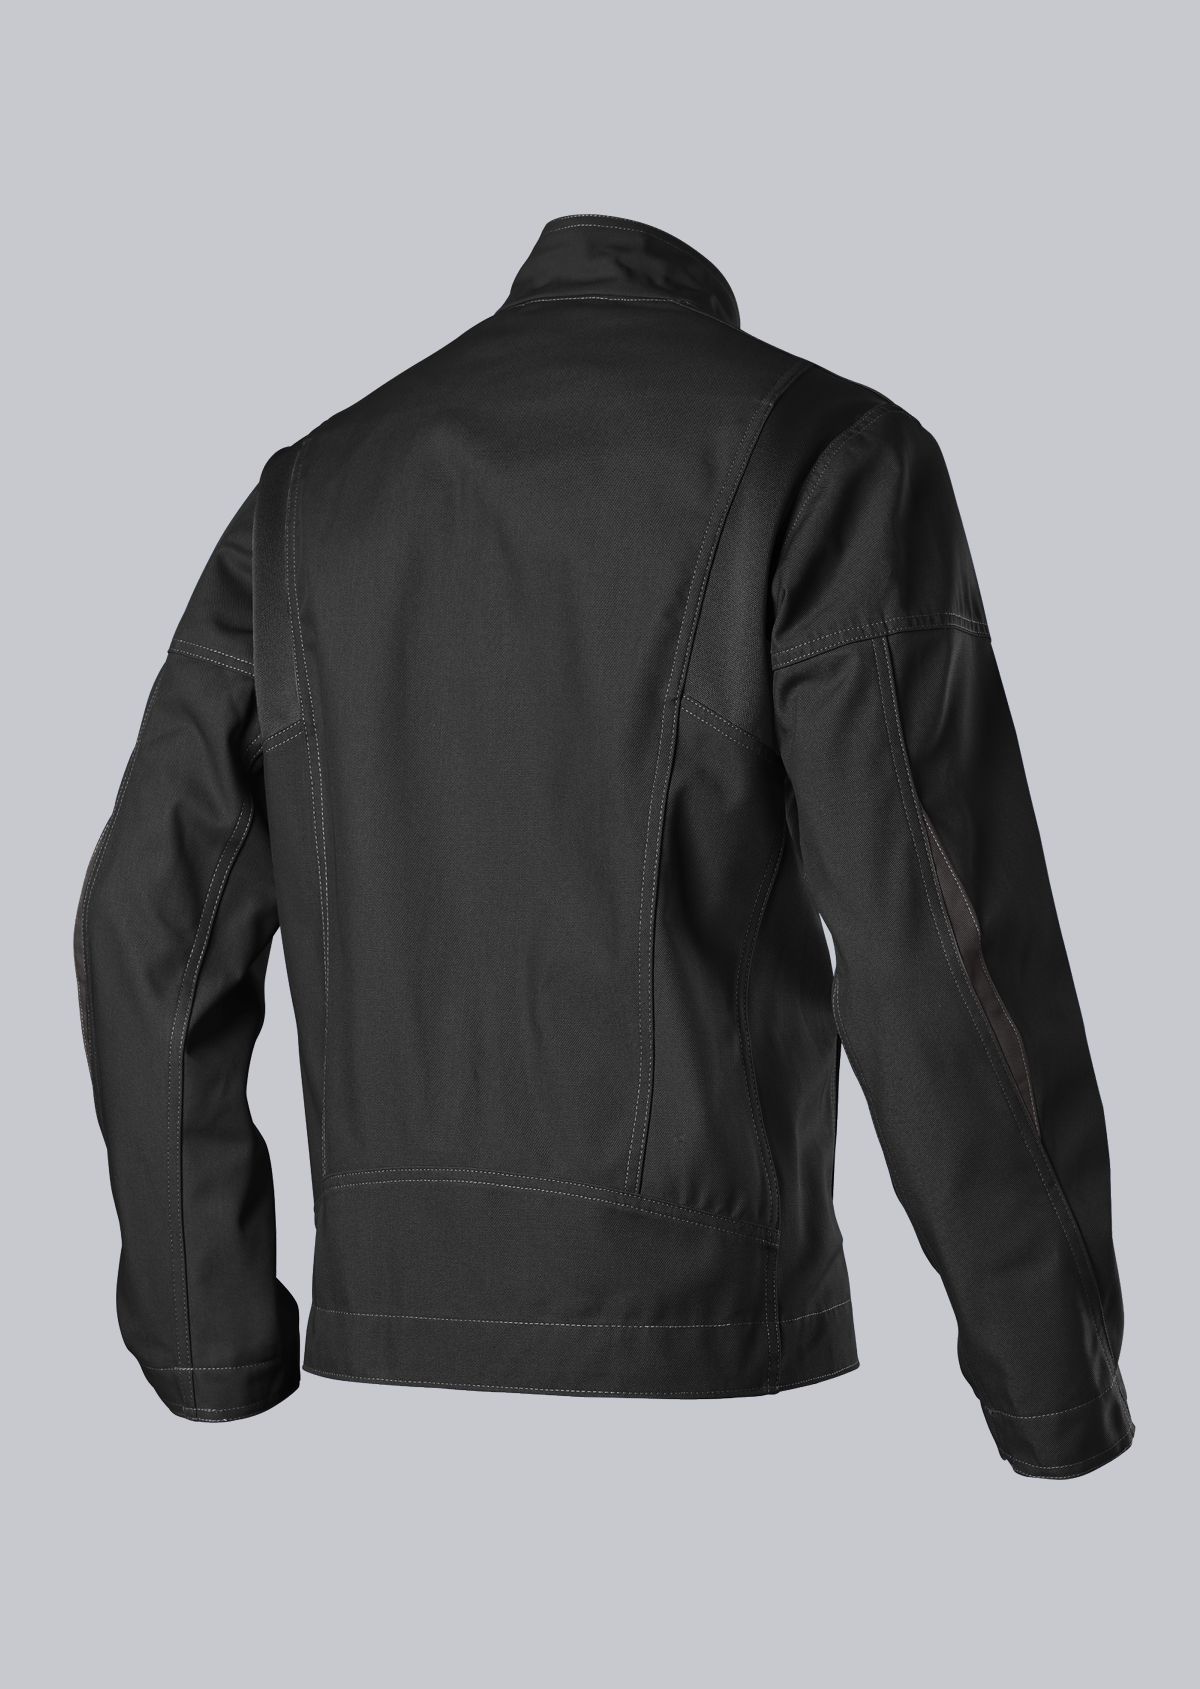 BP® Comfort work jacket with stretch inserts